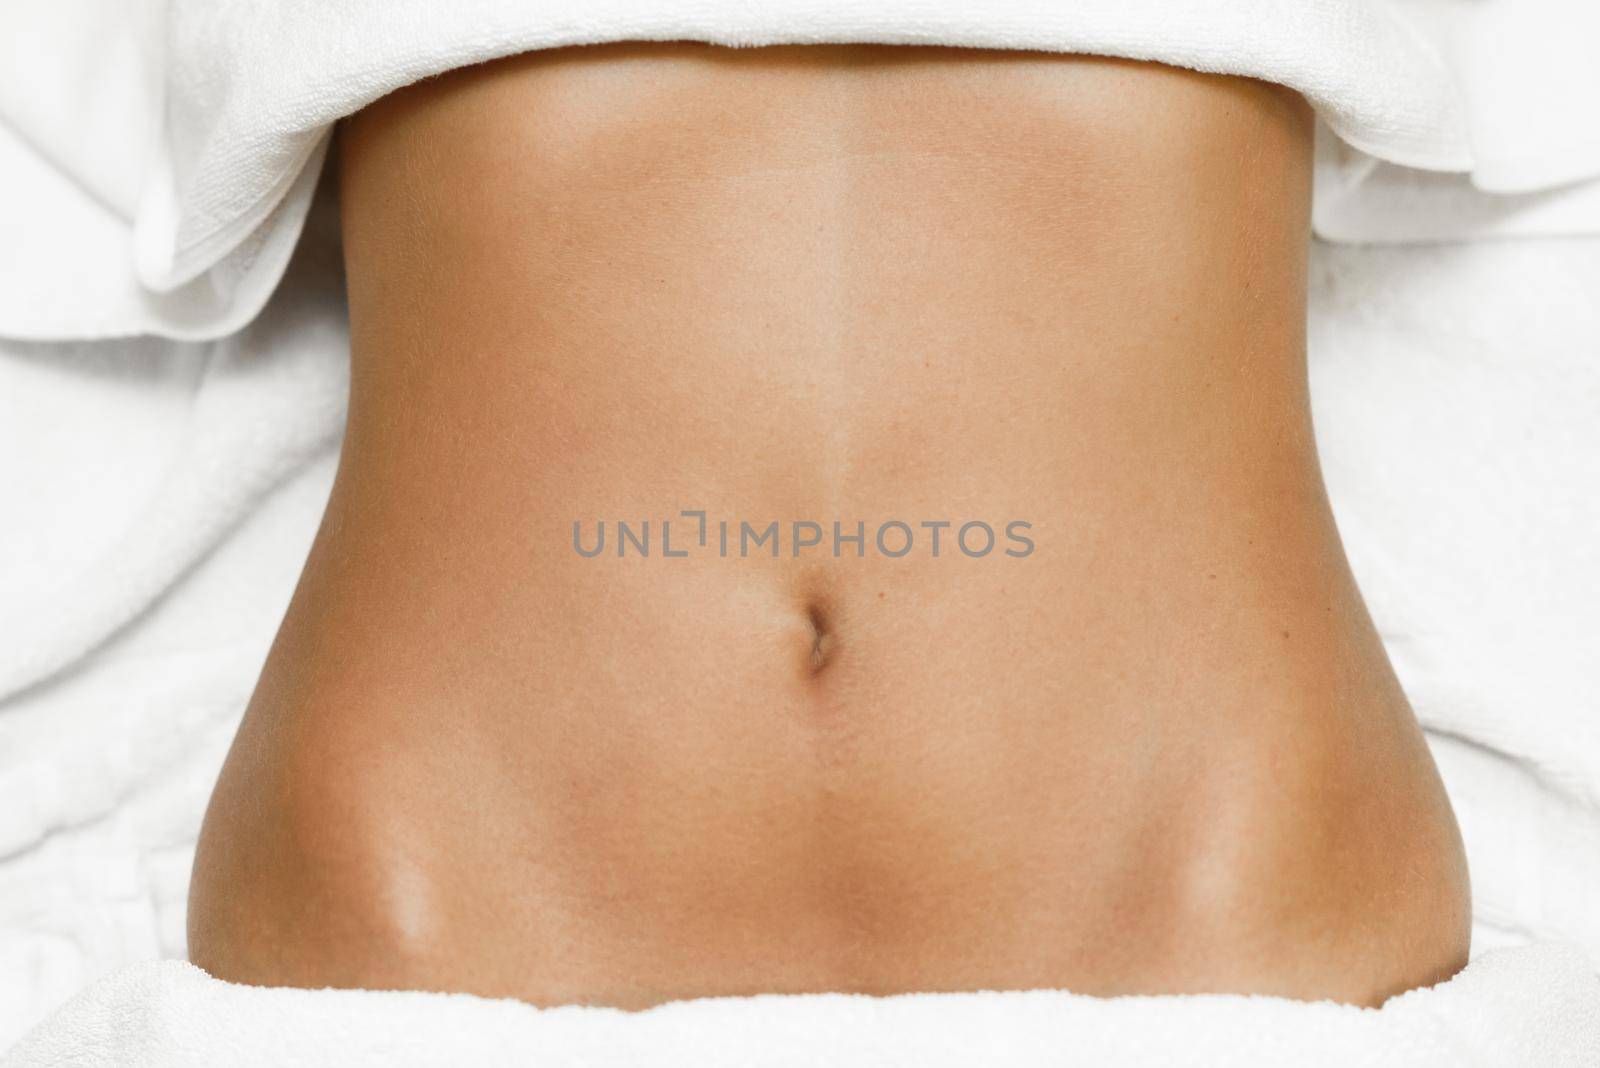 Top view of tan female abdomen laying on spa bed with white towels.